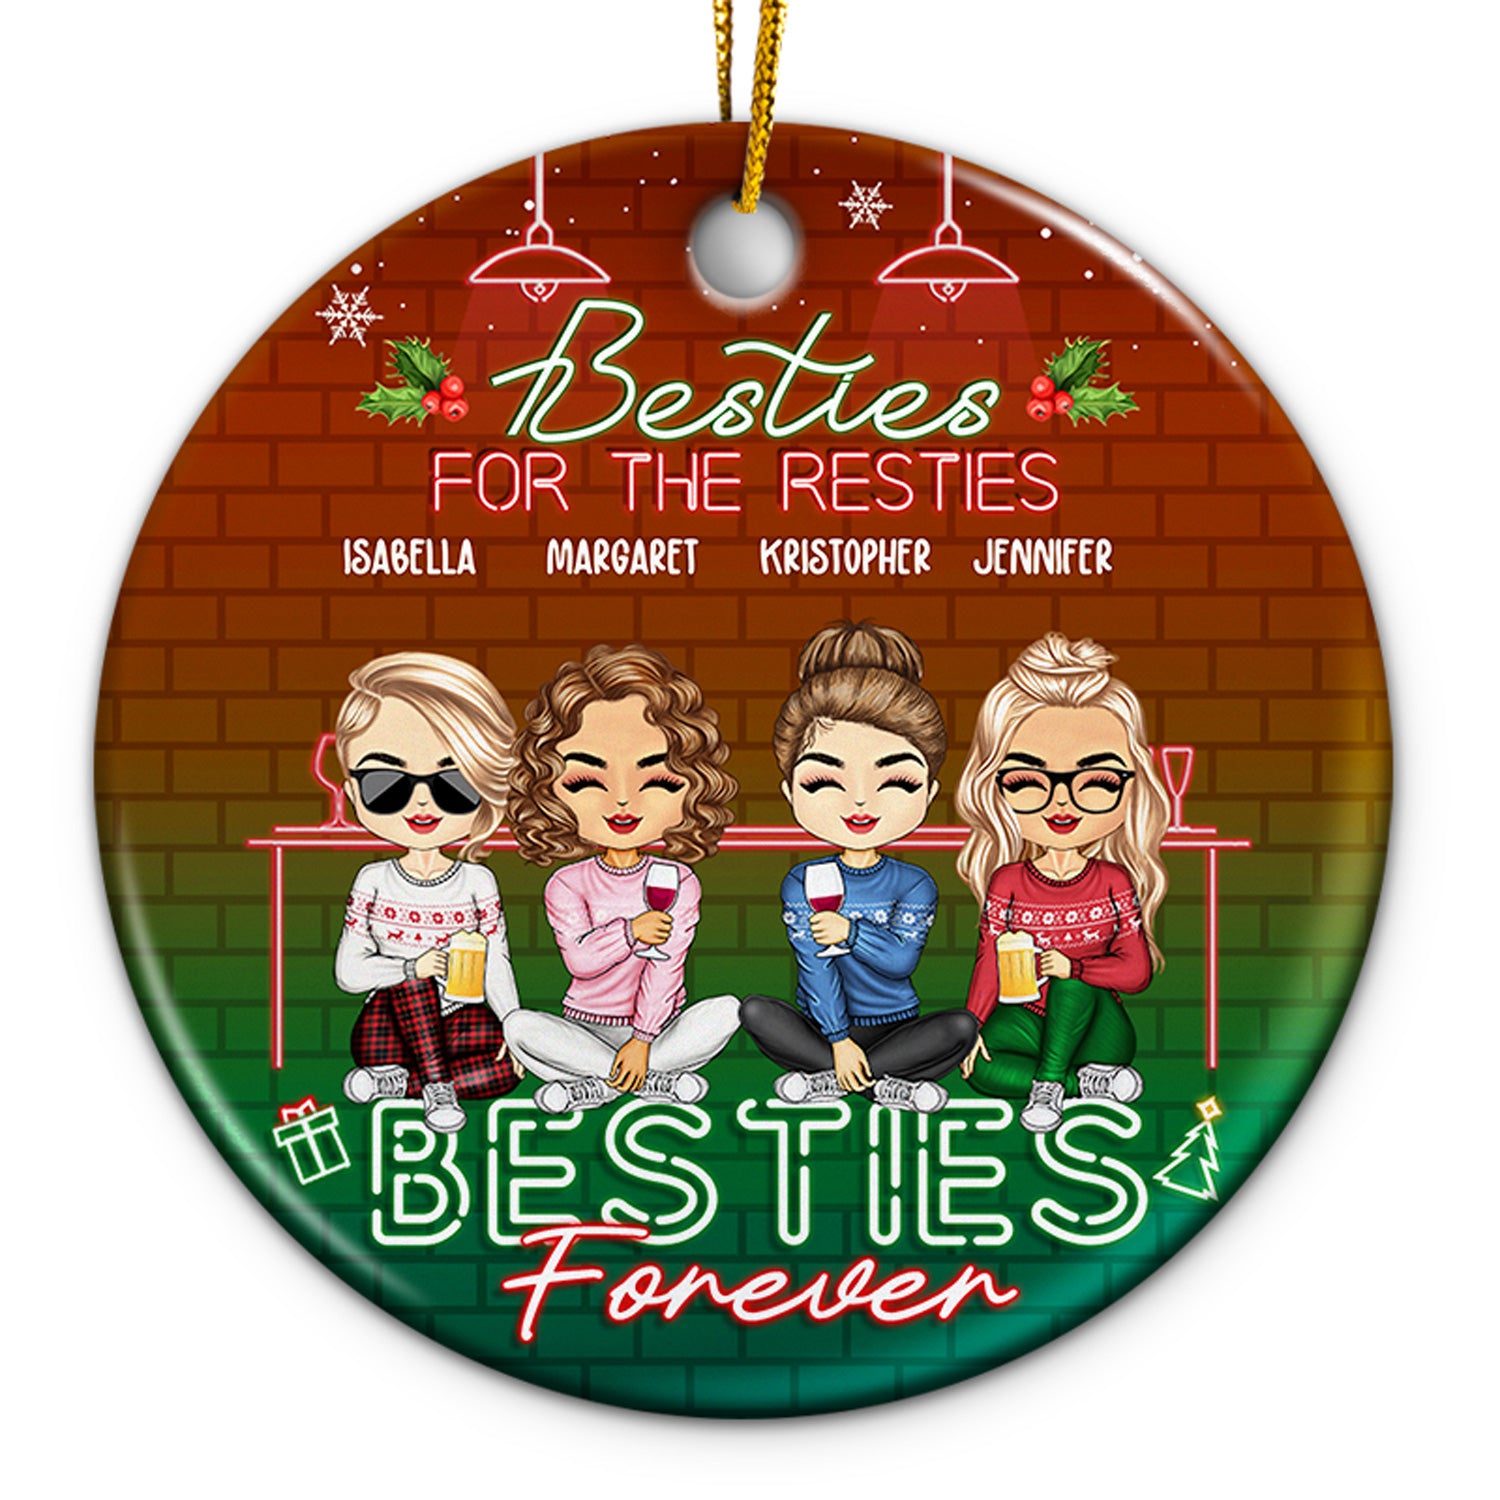 Besties For The Resties - Christmas Gift For Besties And Siblings - Personalized Custom Circle Ceramic Ornament